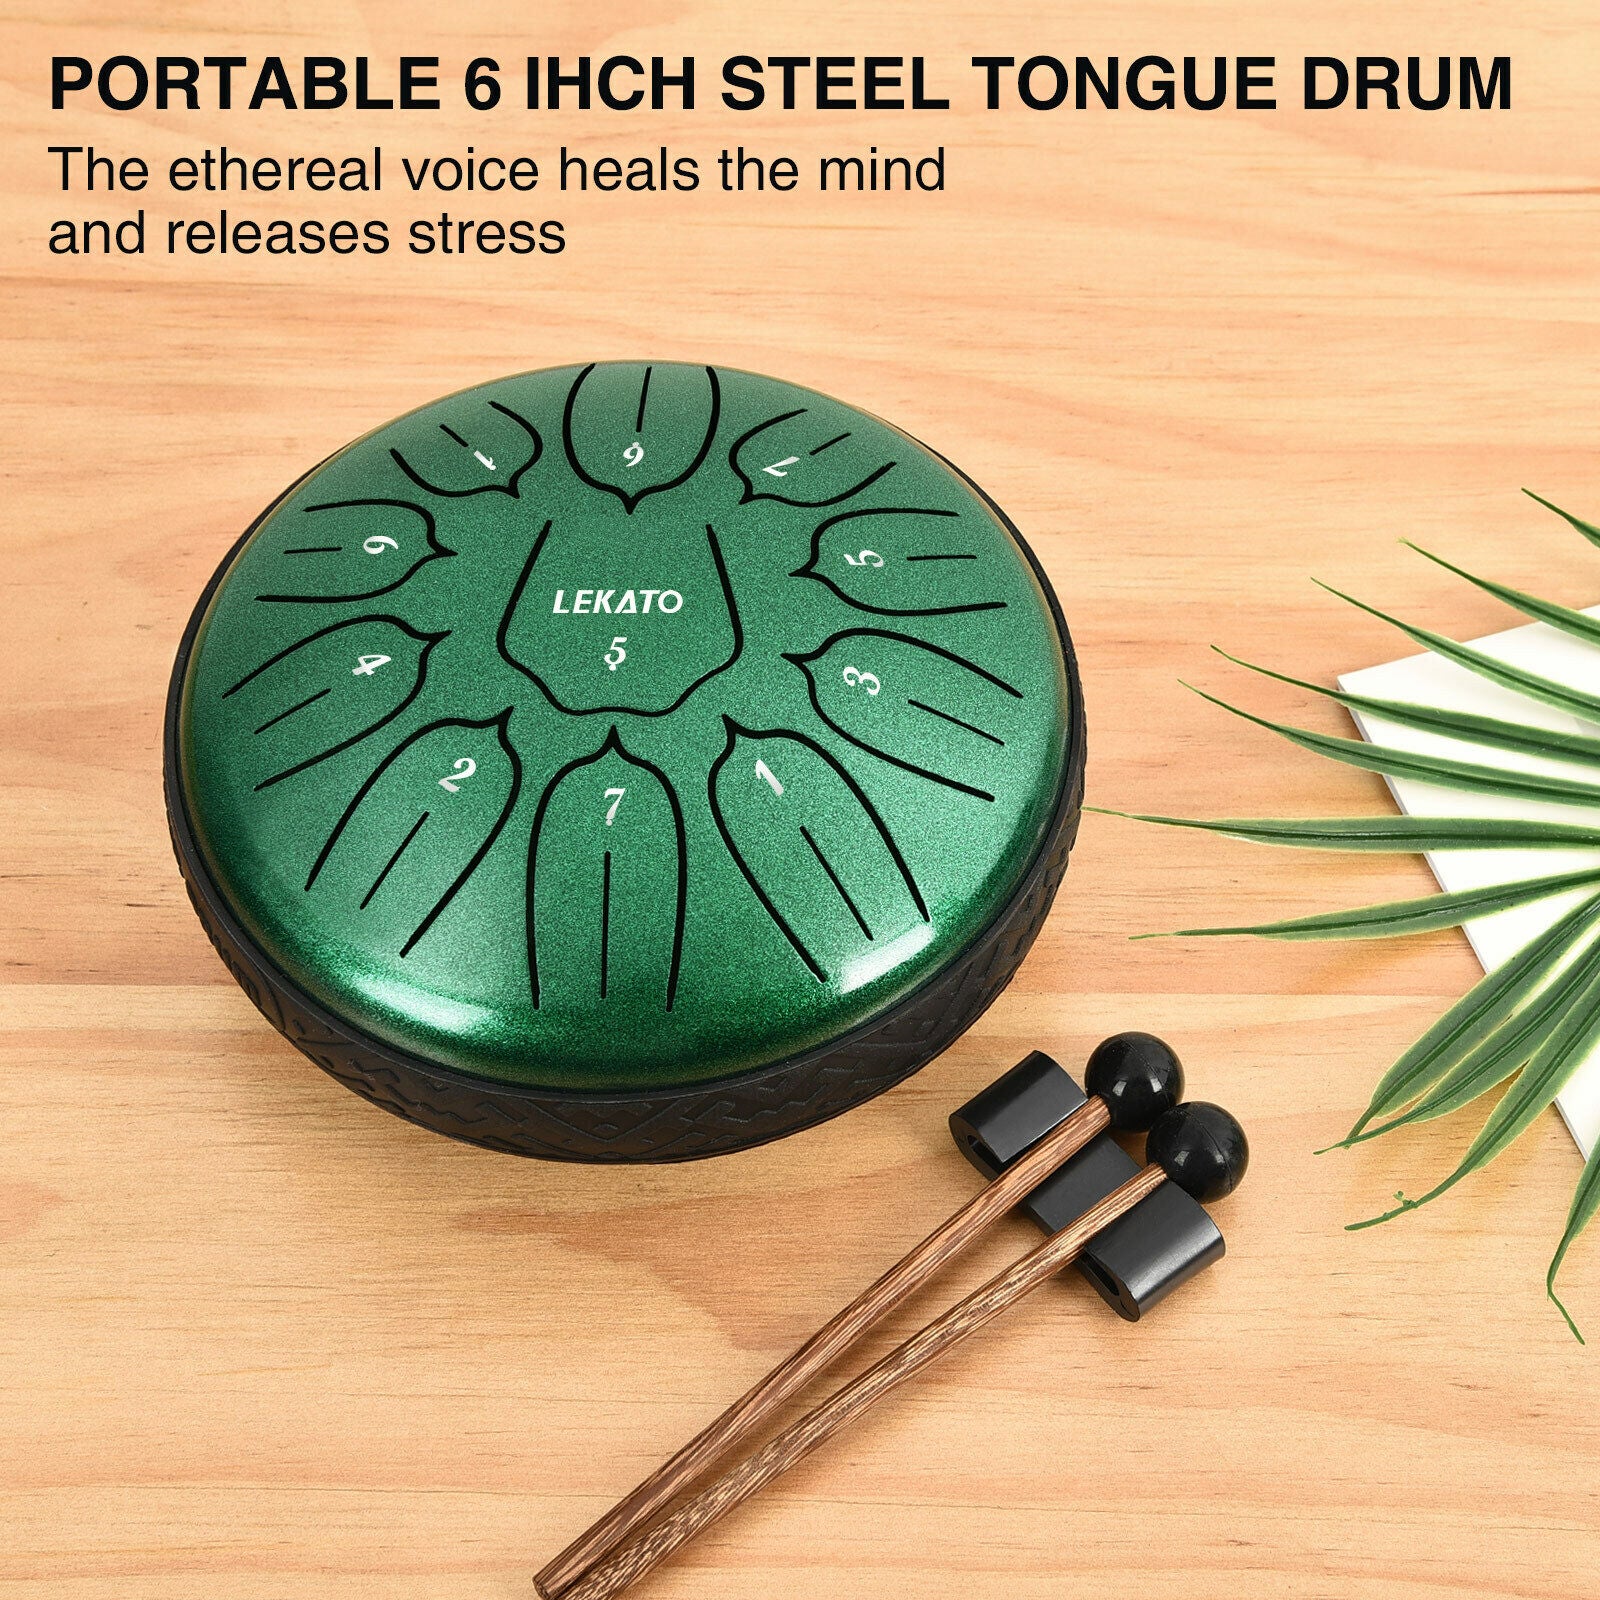 Musical Instrument Steel Tongue Drum with Drumsticks